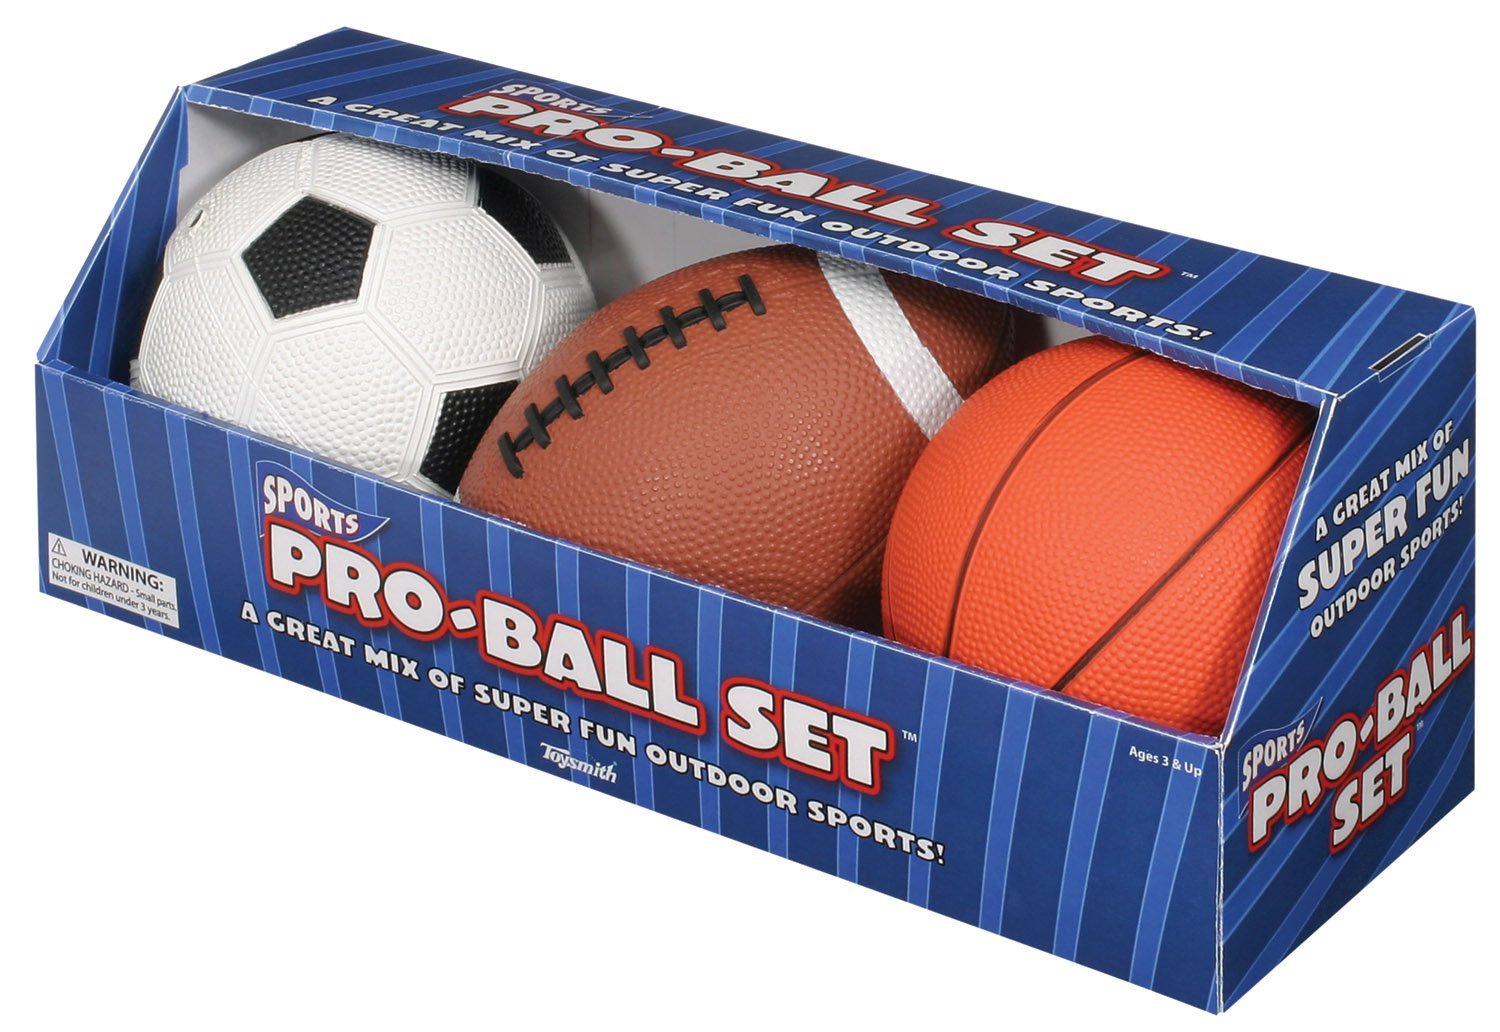 ball set for toddlers